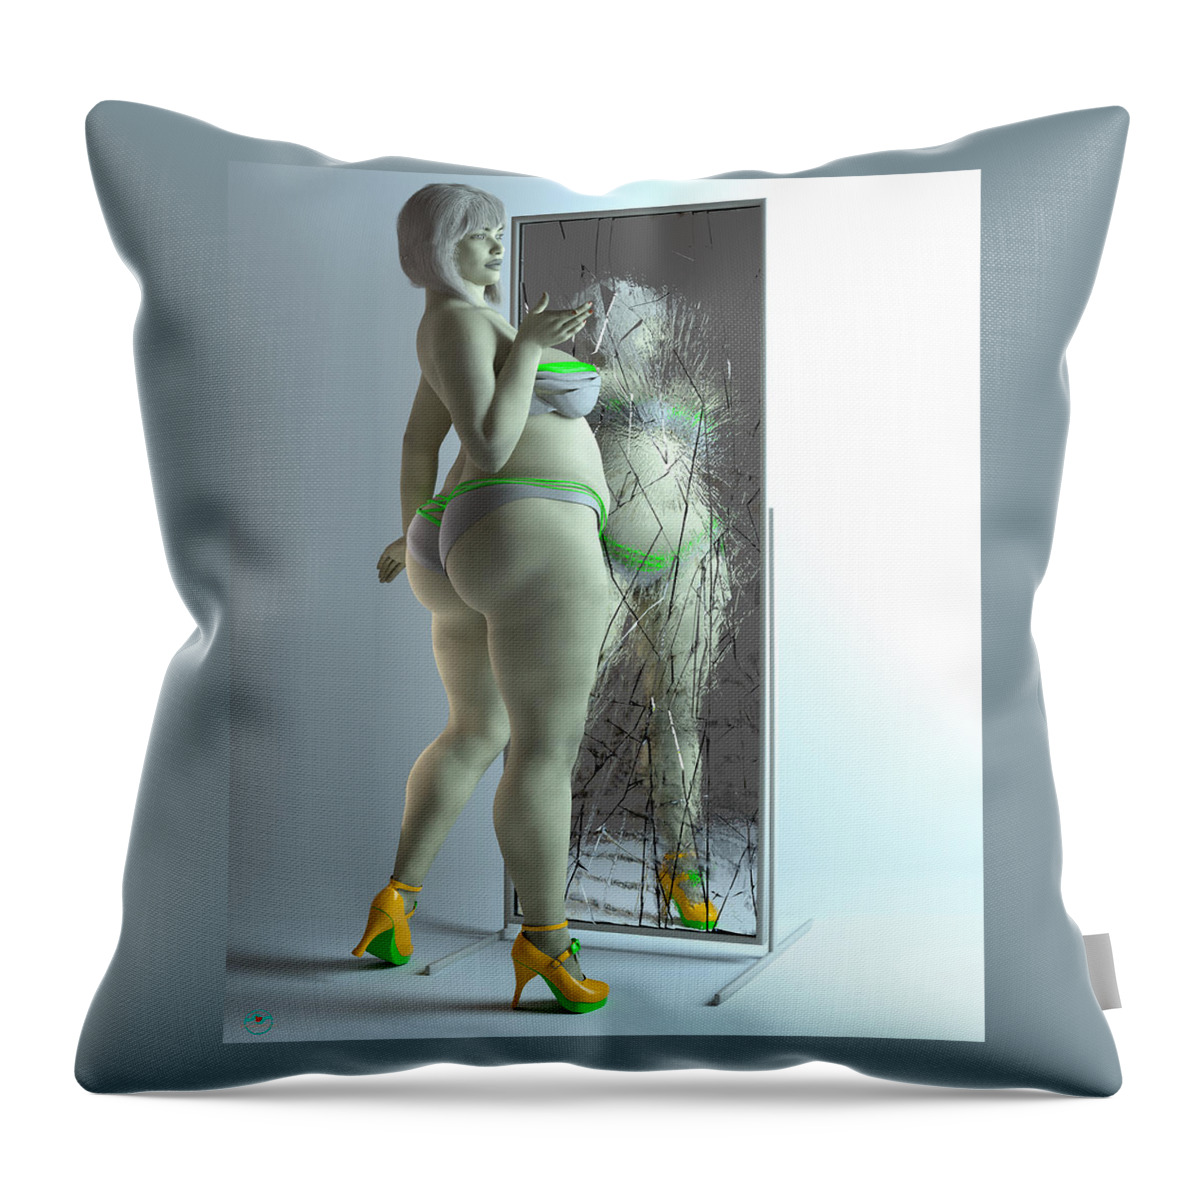 Female Throw Pillow featuring the digital art Reflection_002 by Williem McWhorter